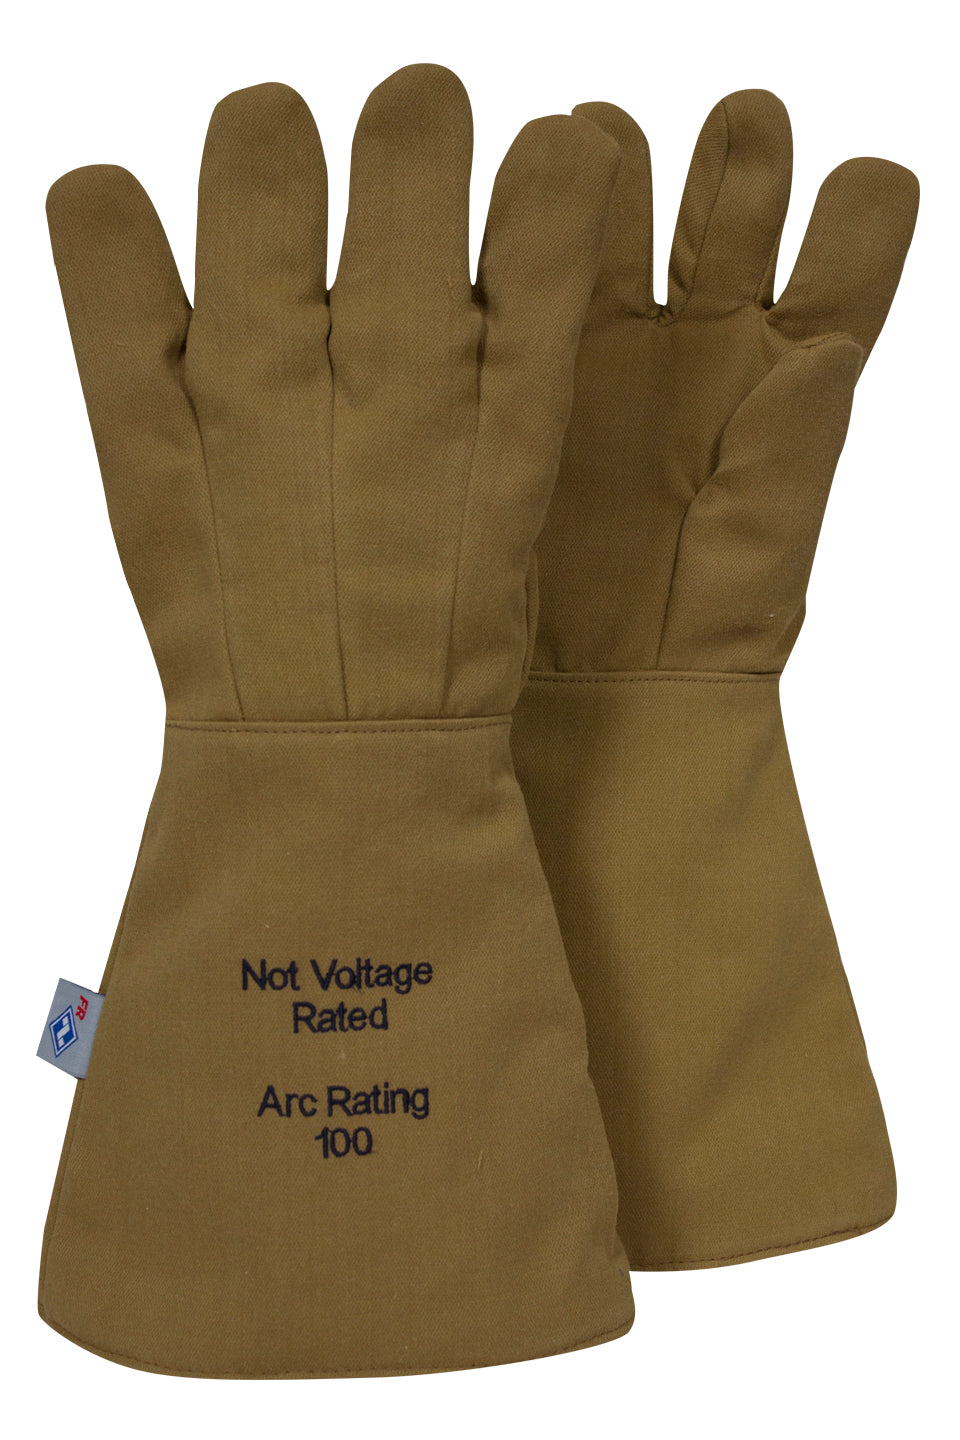 Enespro ArcGuard 100 cal Arc Rated Gloves